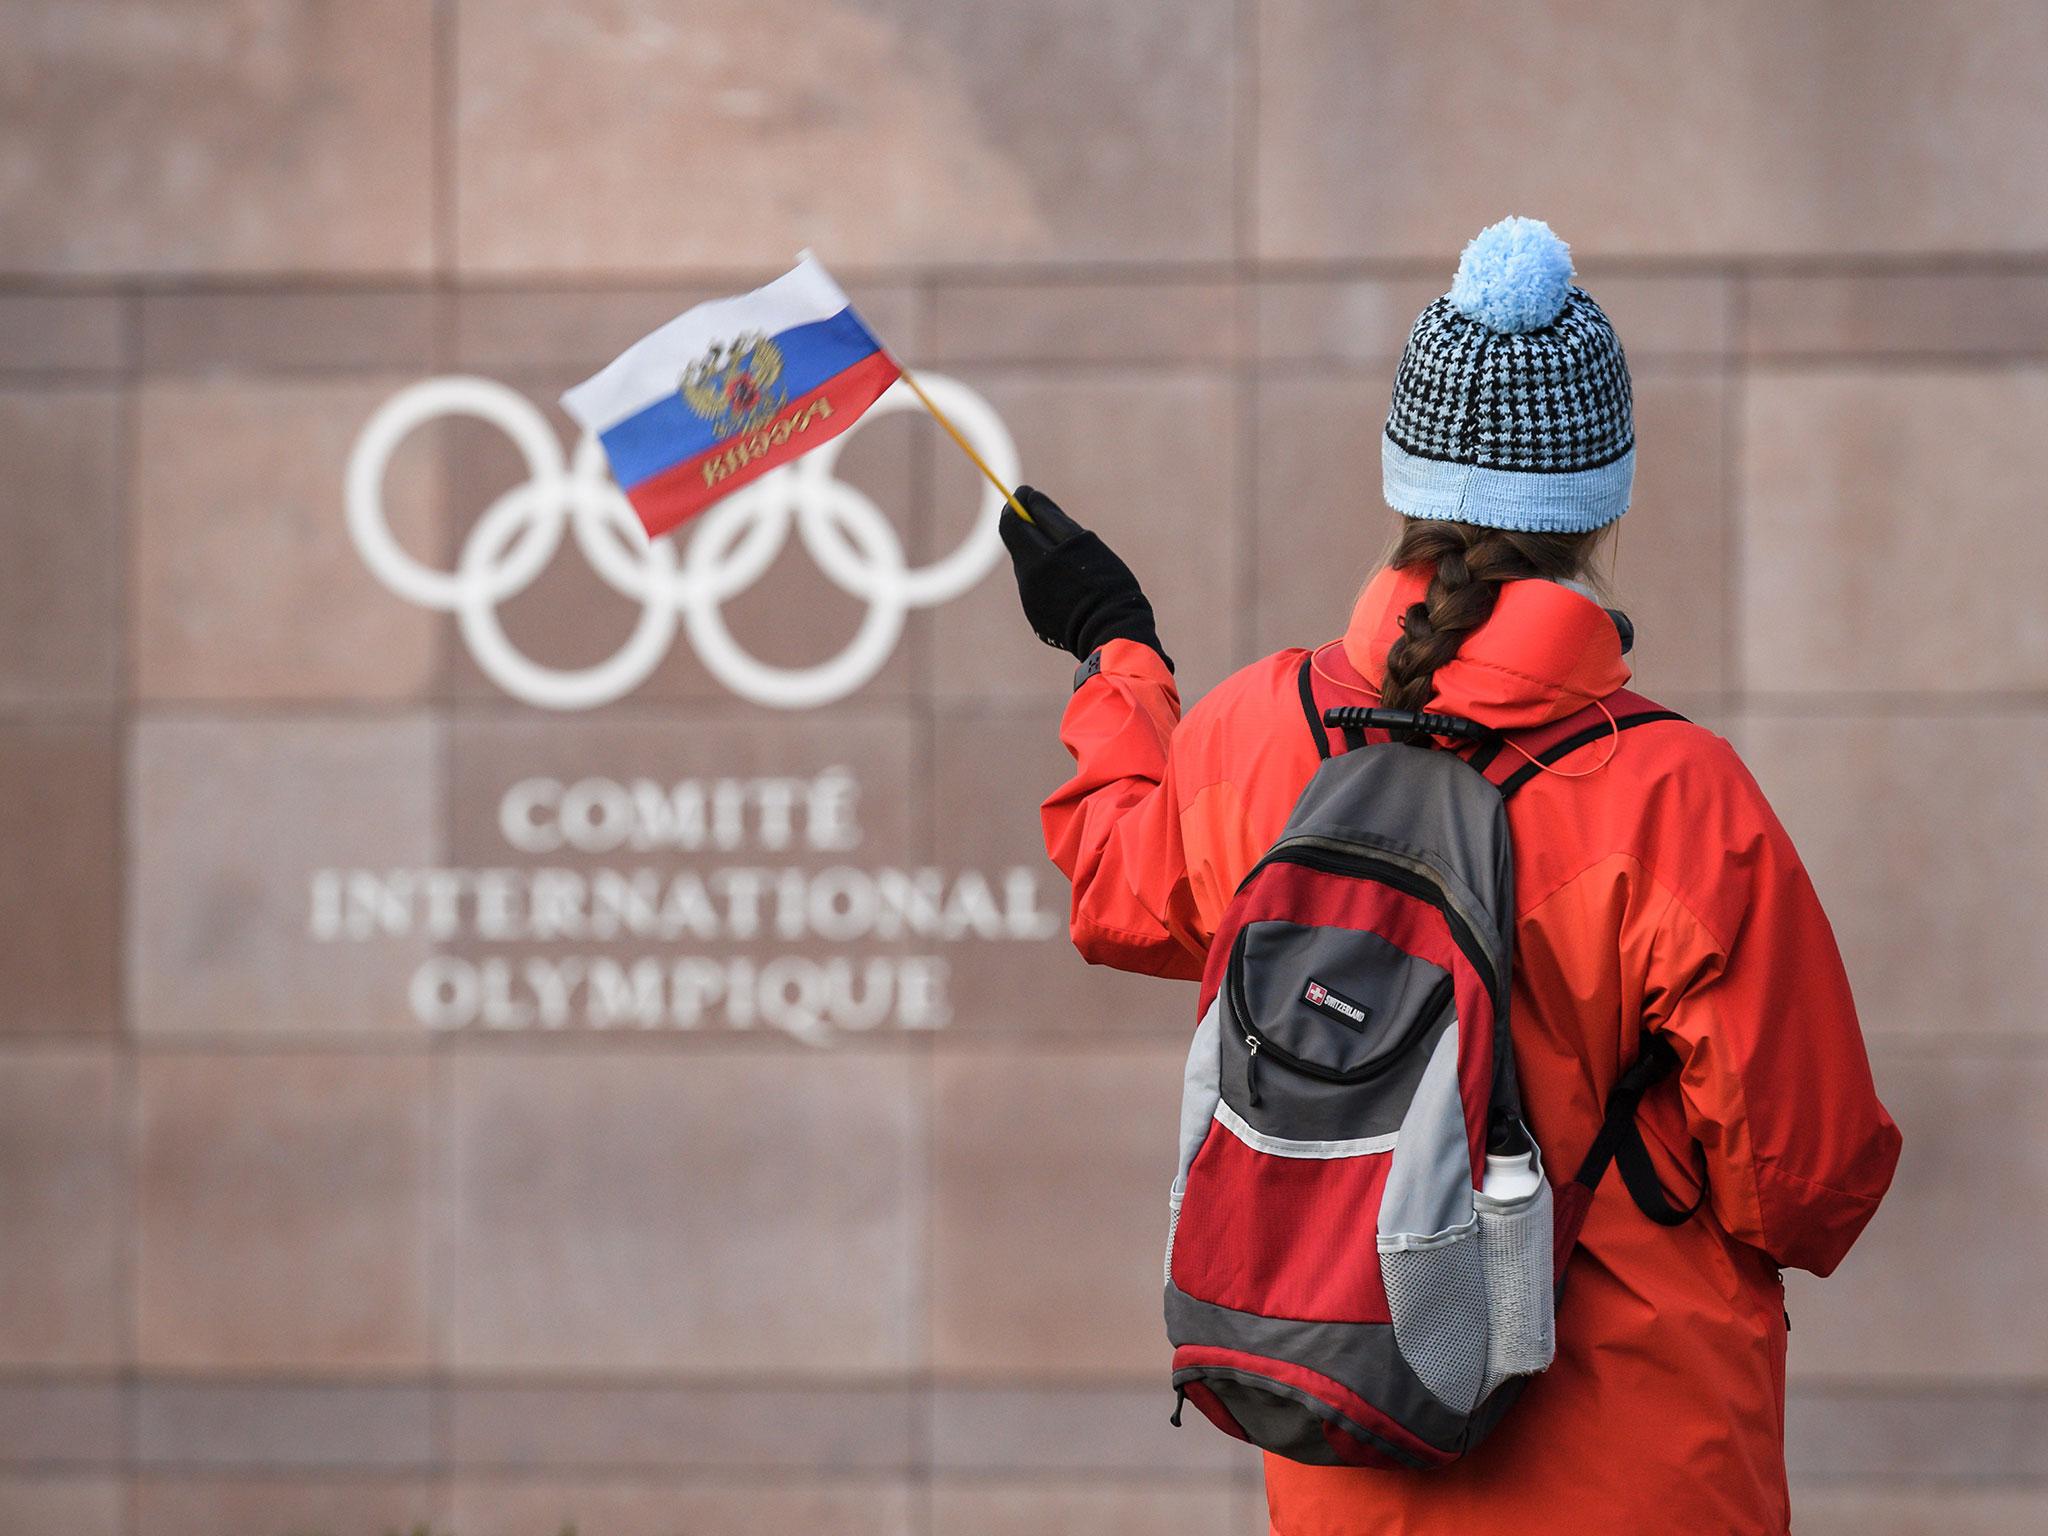 The Russian flag will not be shown during the Winter Olympics